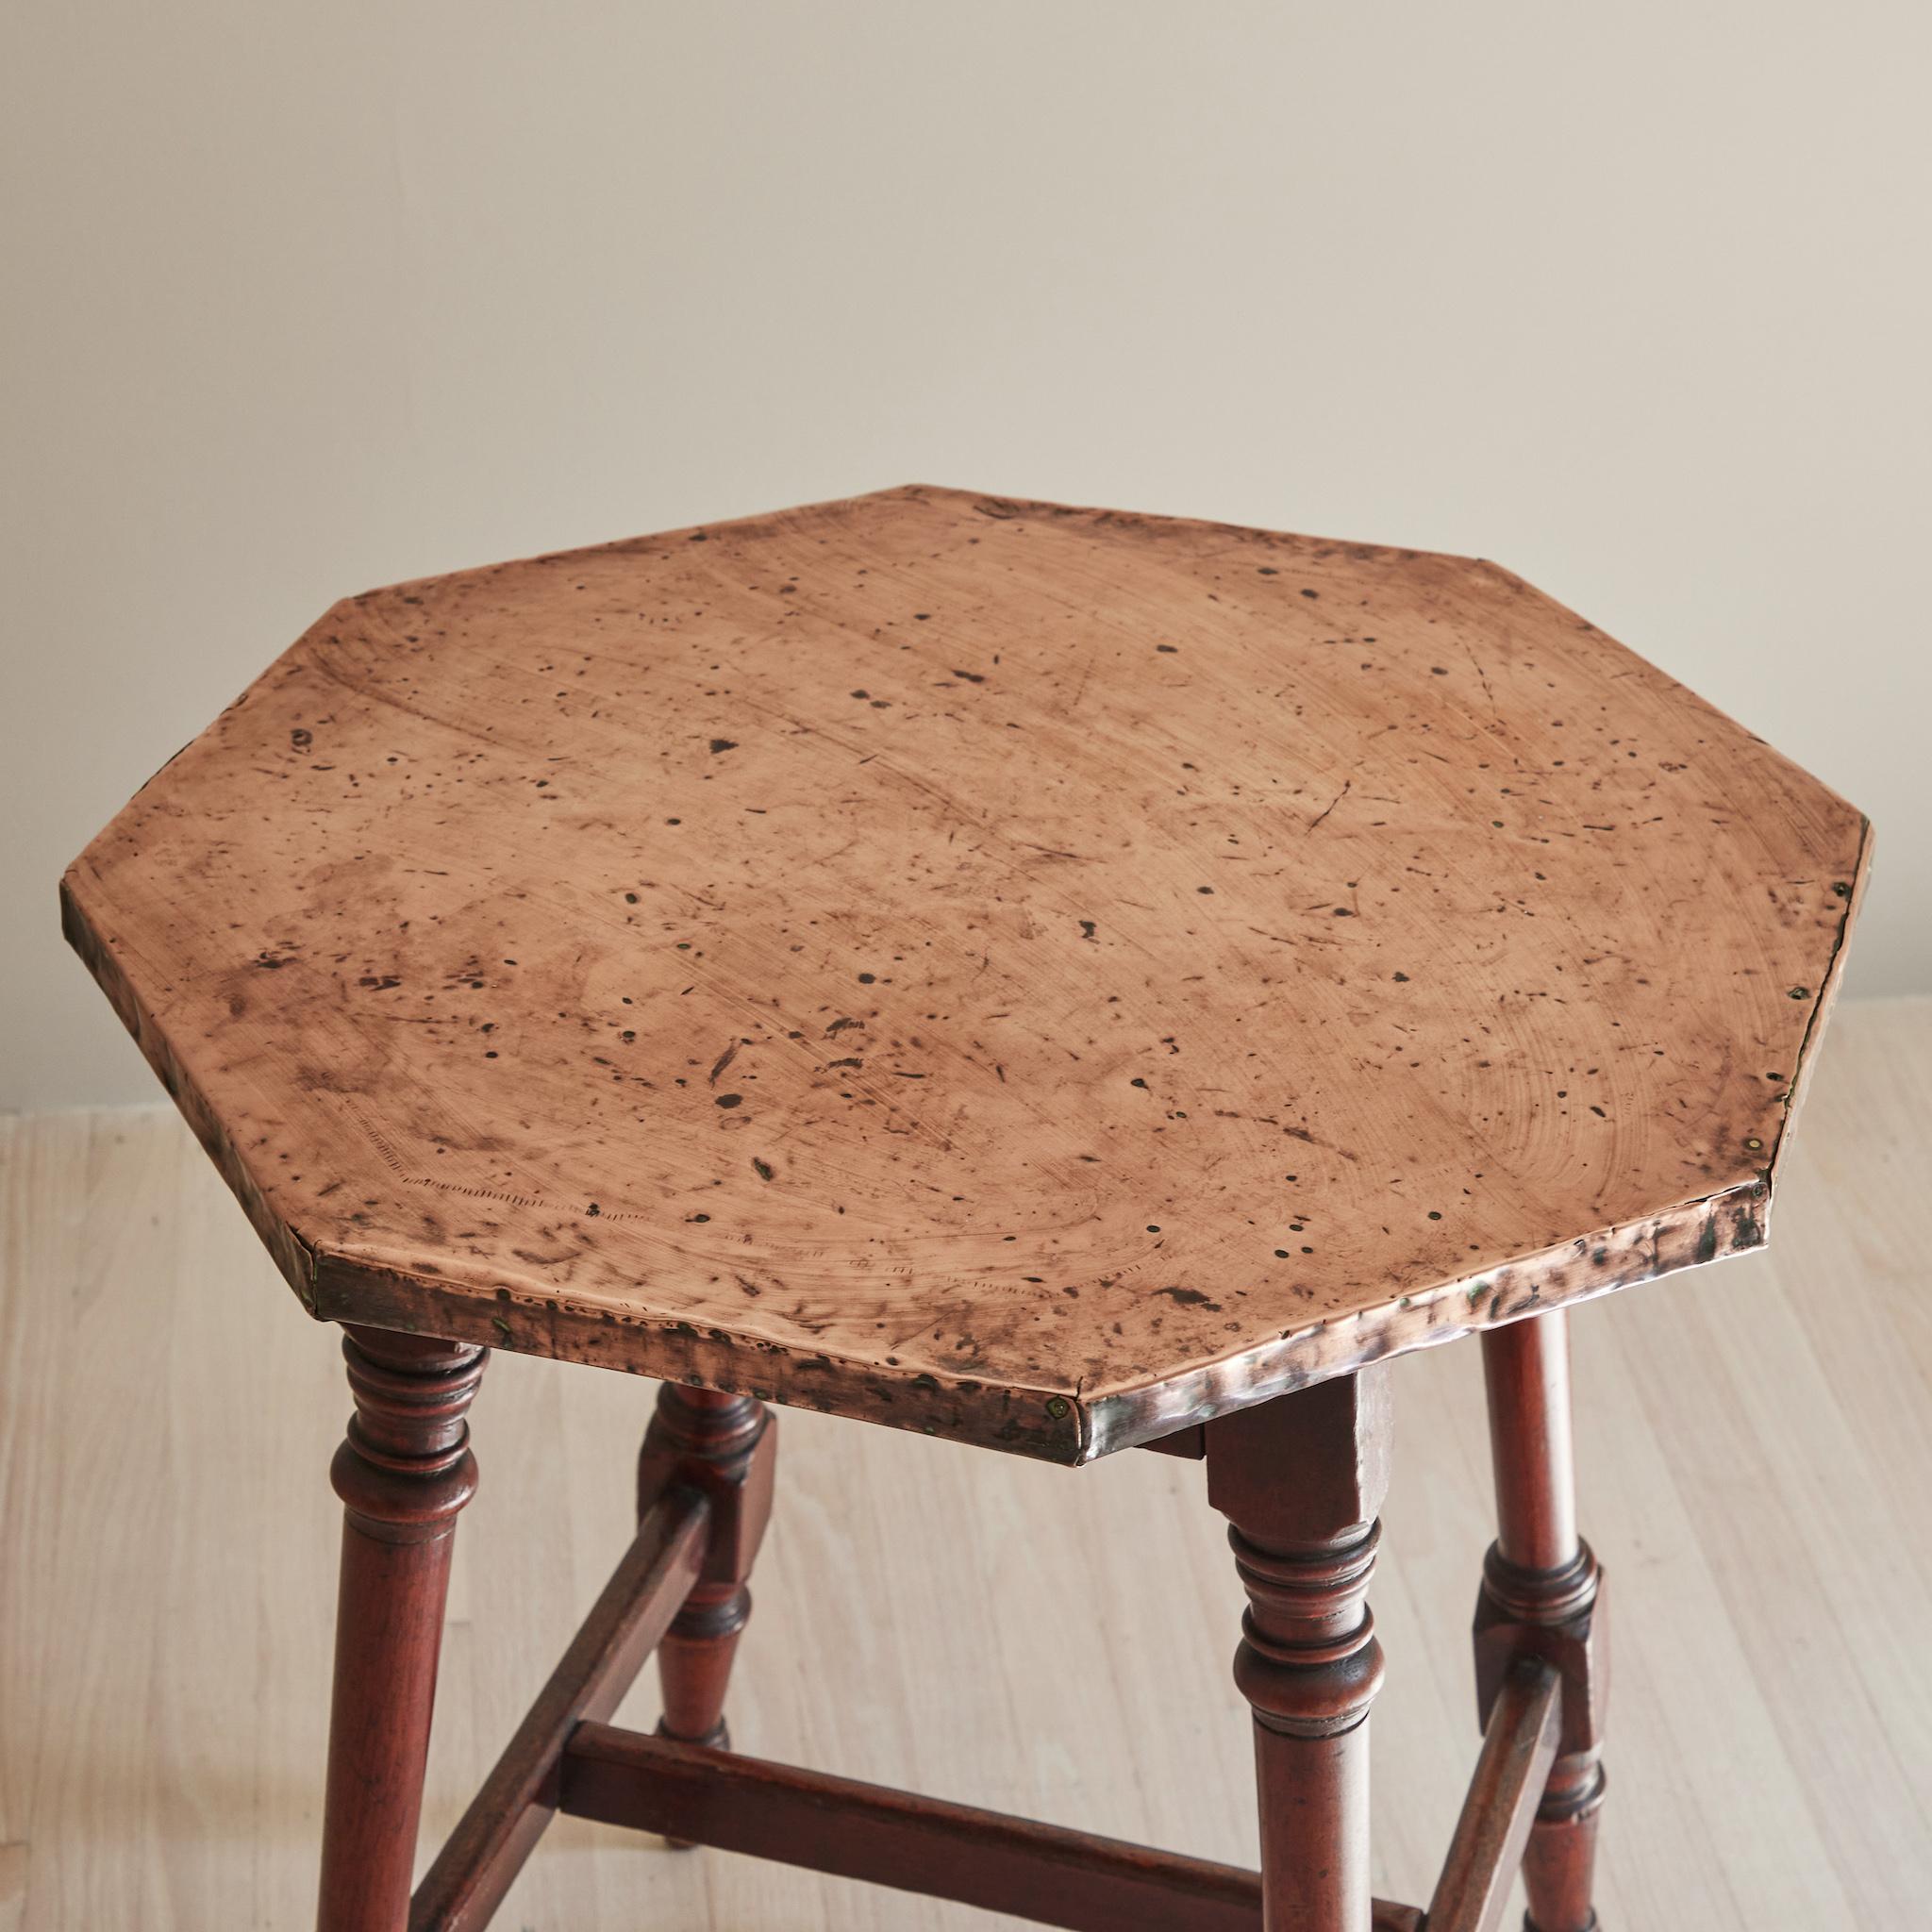 Late 19th Century Copper Top Side Table with Wooden Legs from England 1